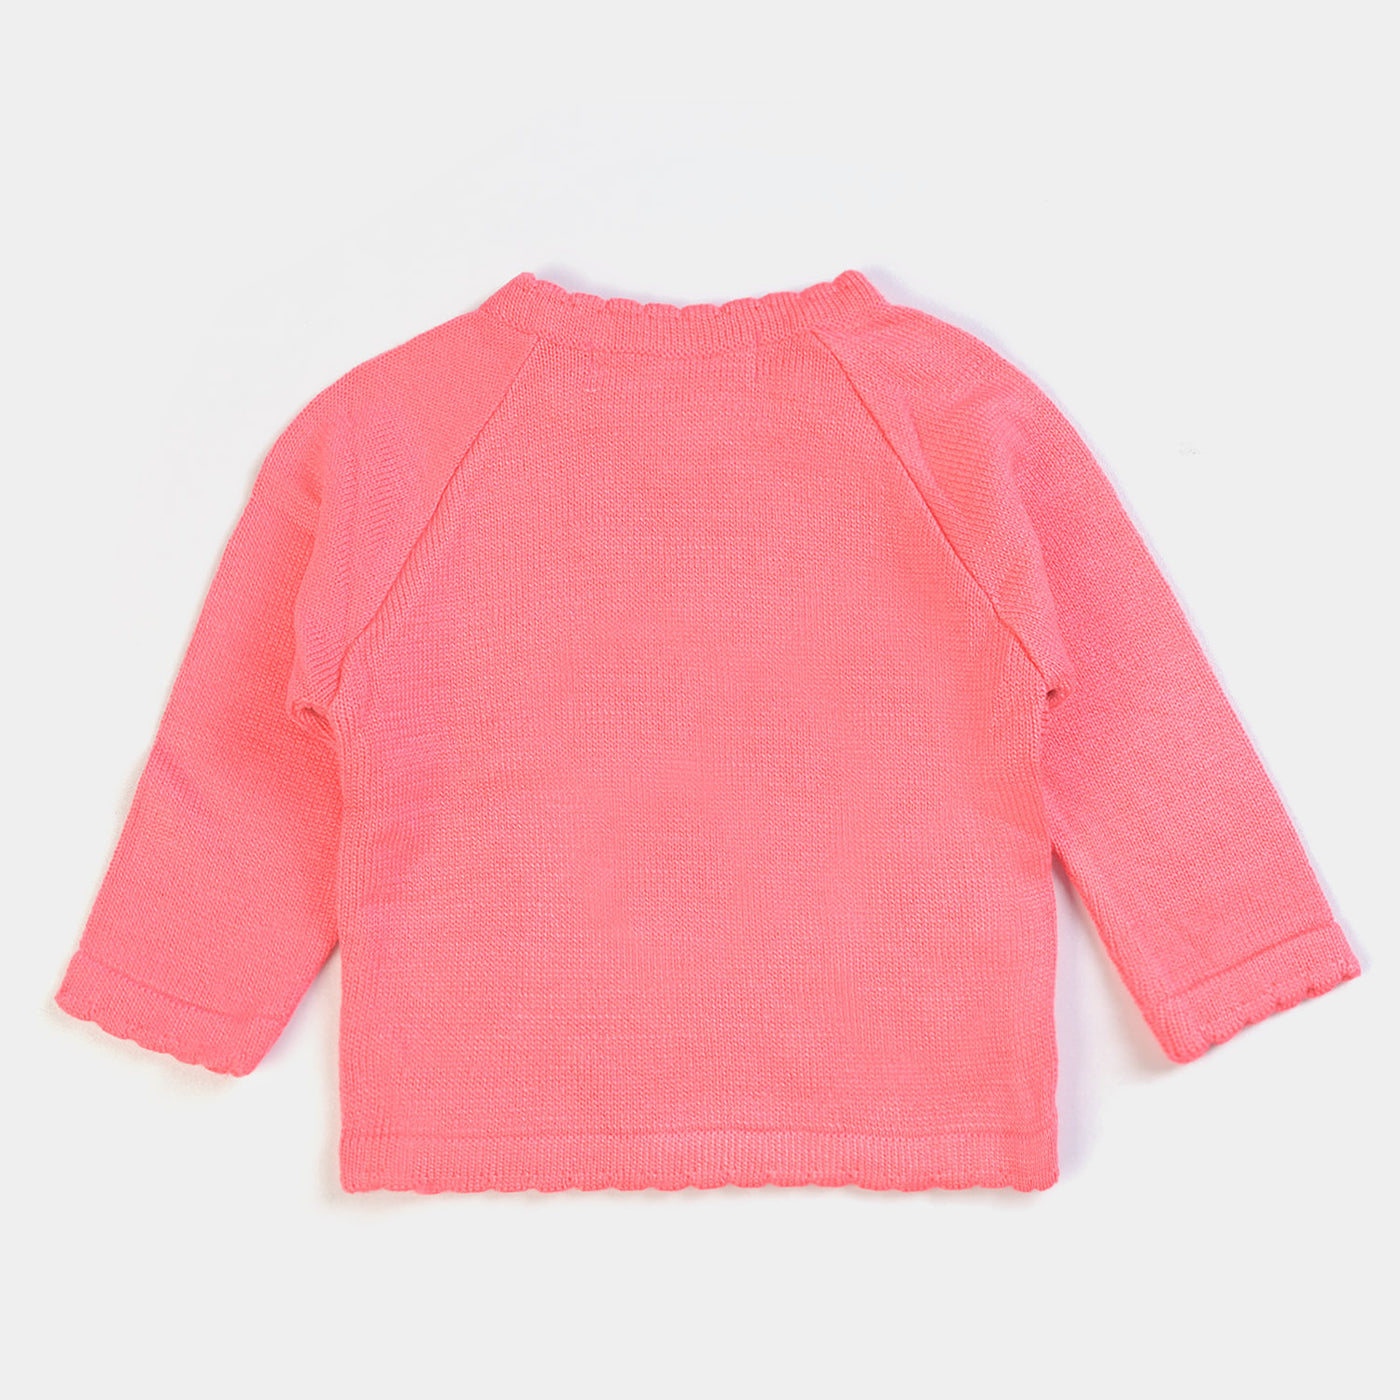 Infant Girls Knitted 2PC Suit -Pink